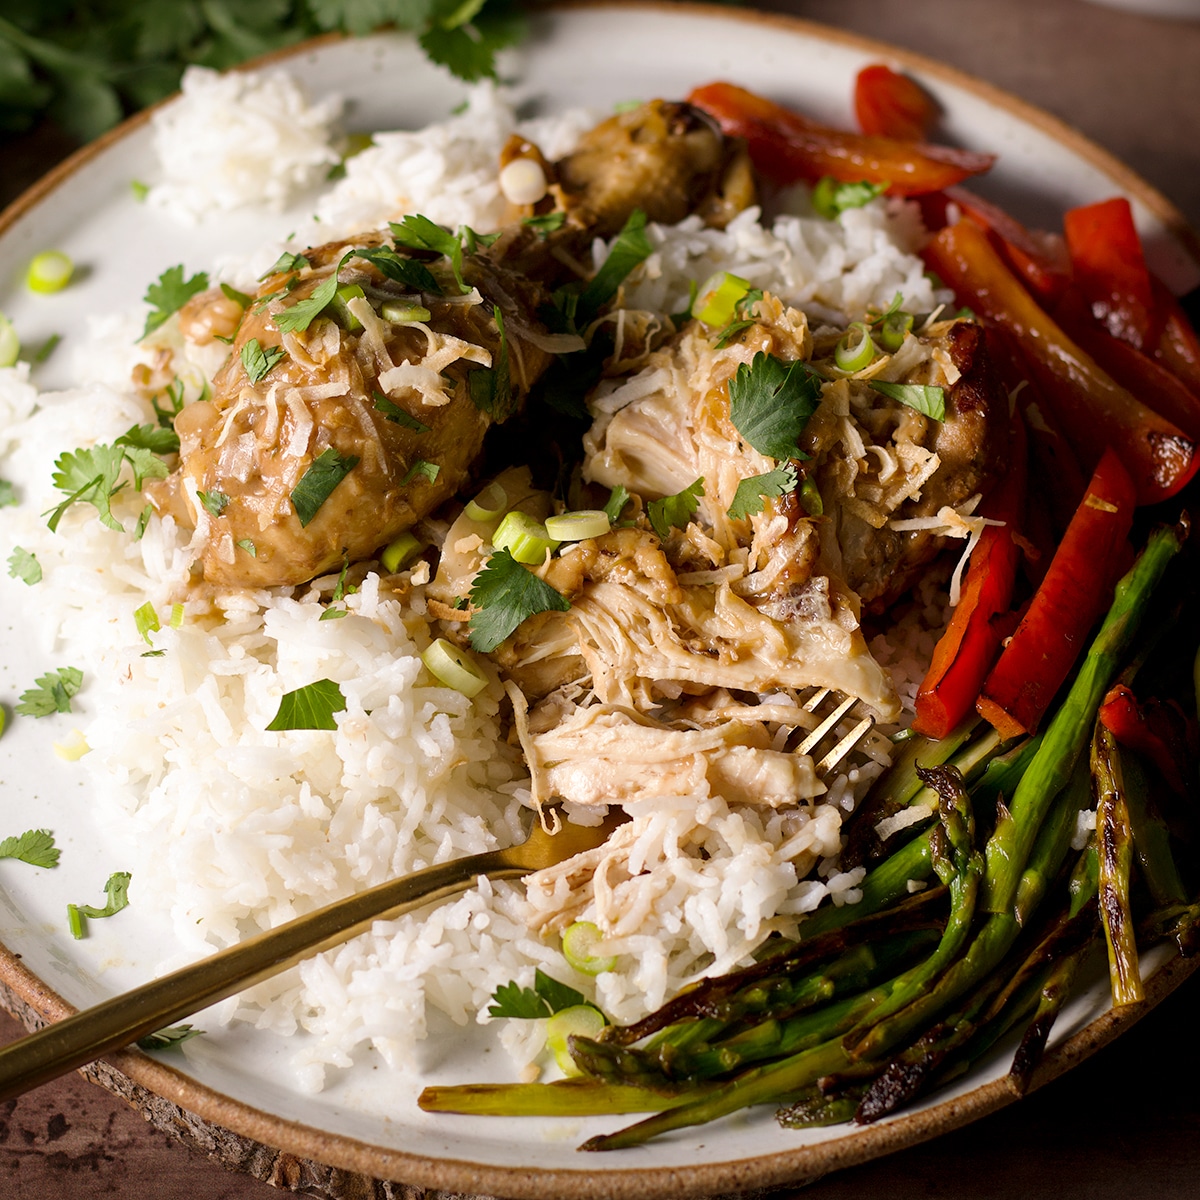 Someone using a fork to cut a bite of coconut chicken adobo served with rice and vegetables.